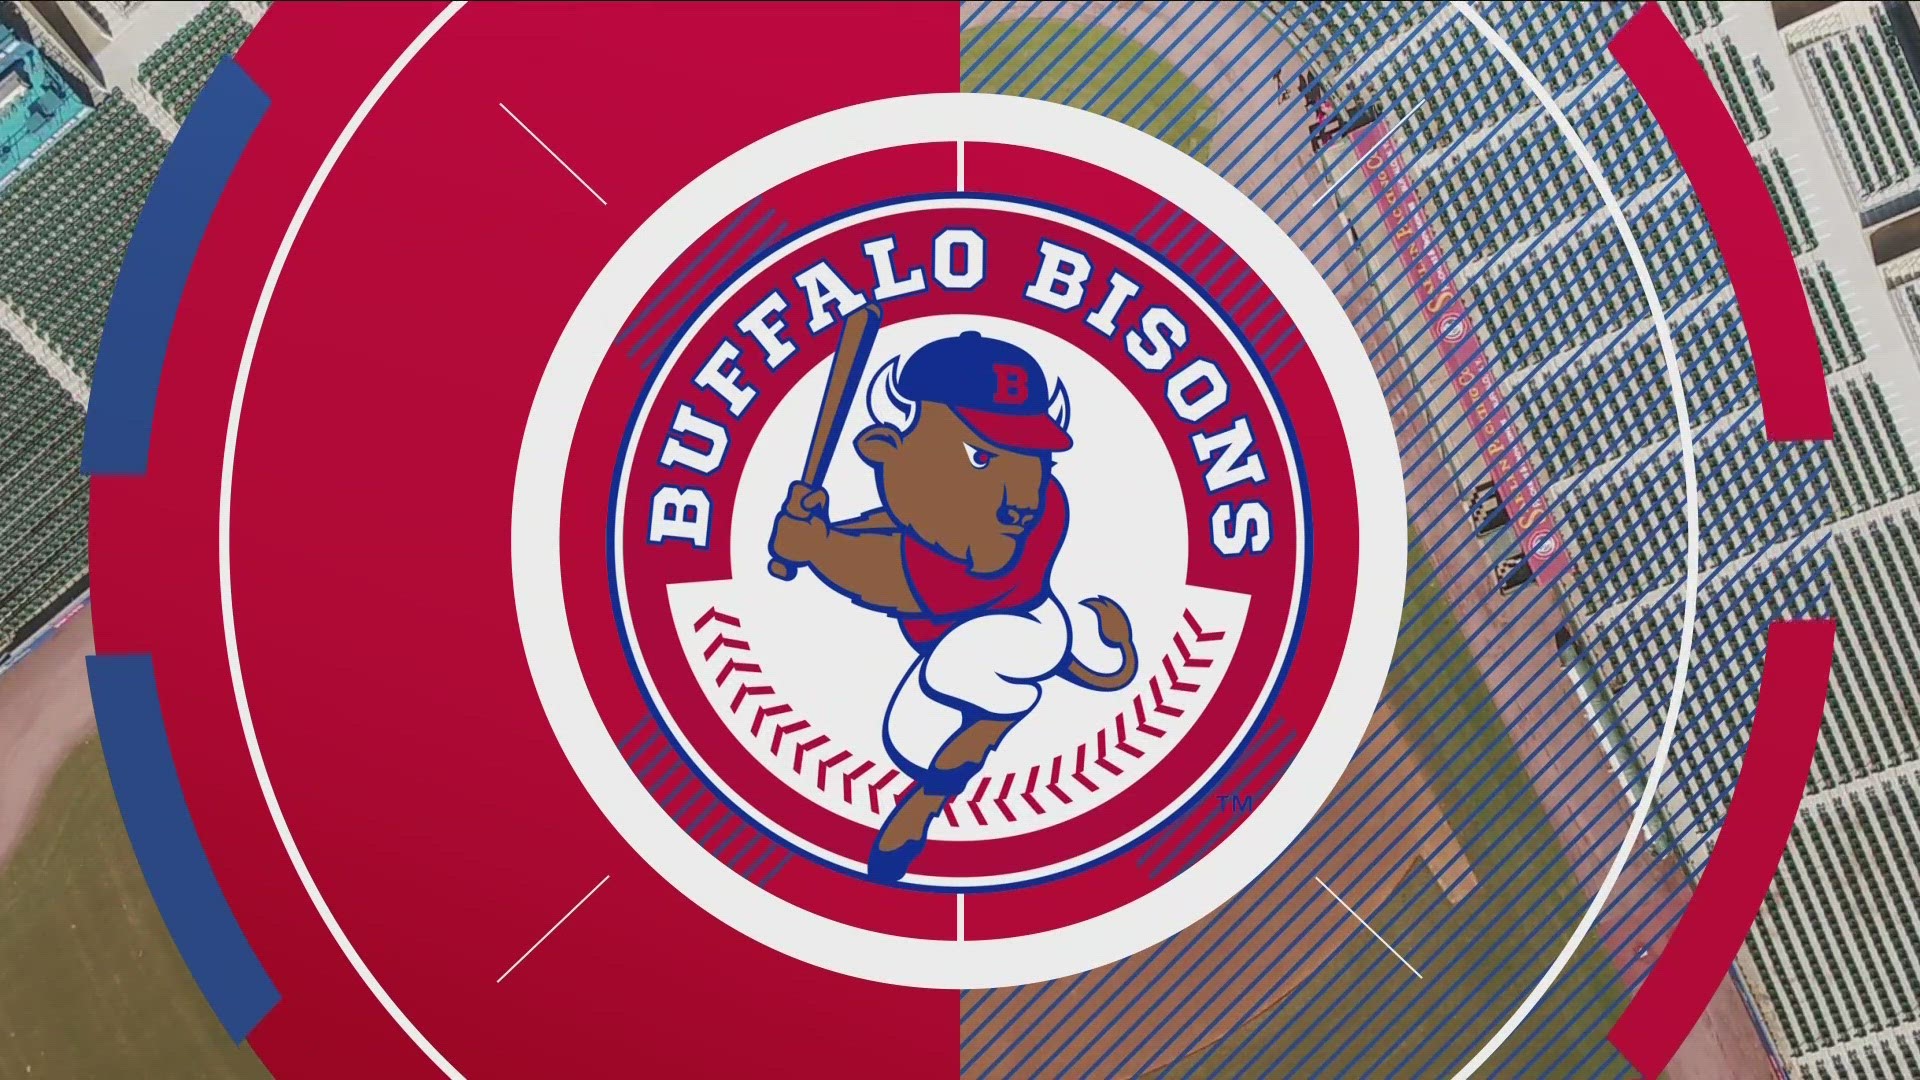 It's opening day for the Buffalo Bisons. Here's what's new this season.